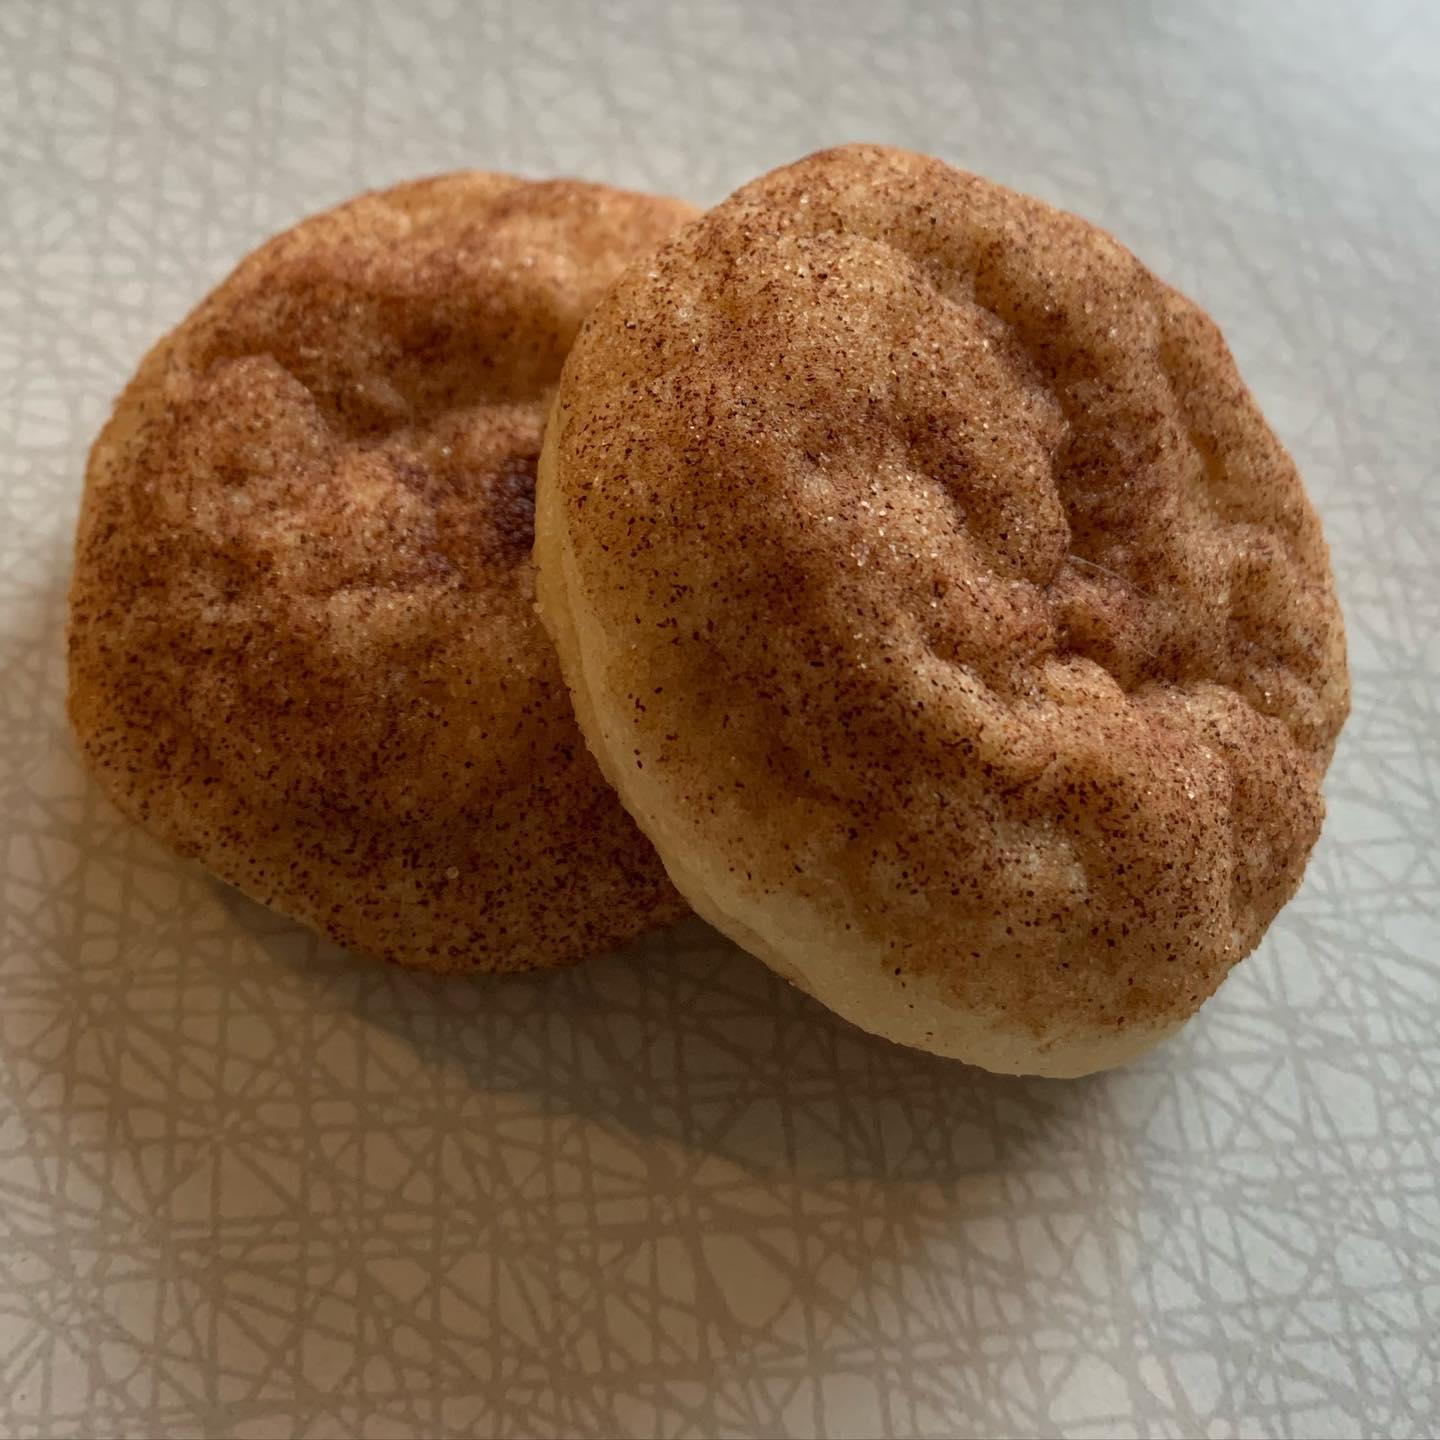 My daughter tried making Snickerdoodle cookies for the first time. They turned out amazingly! #baking #cookies #snickerdoodle